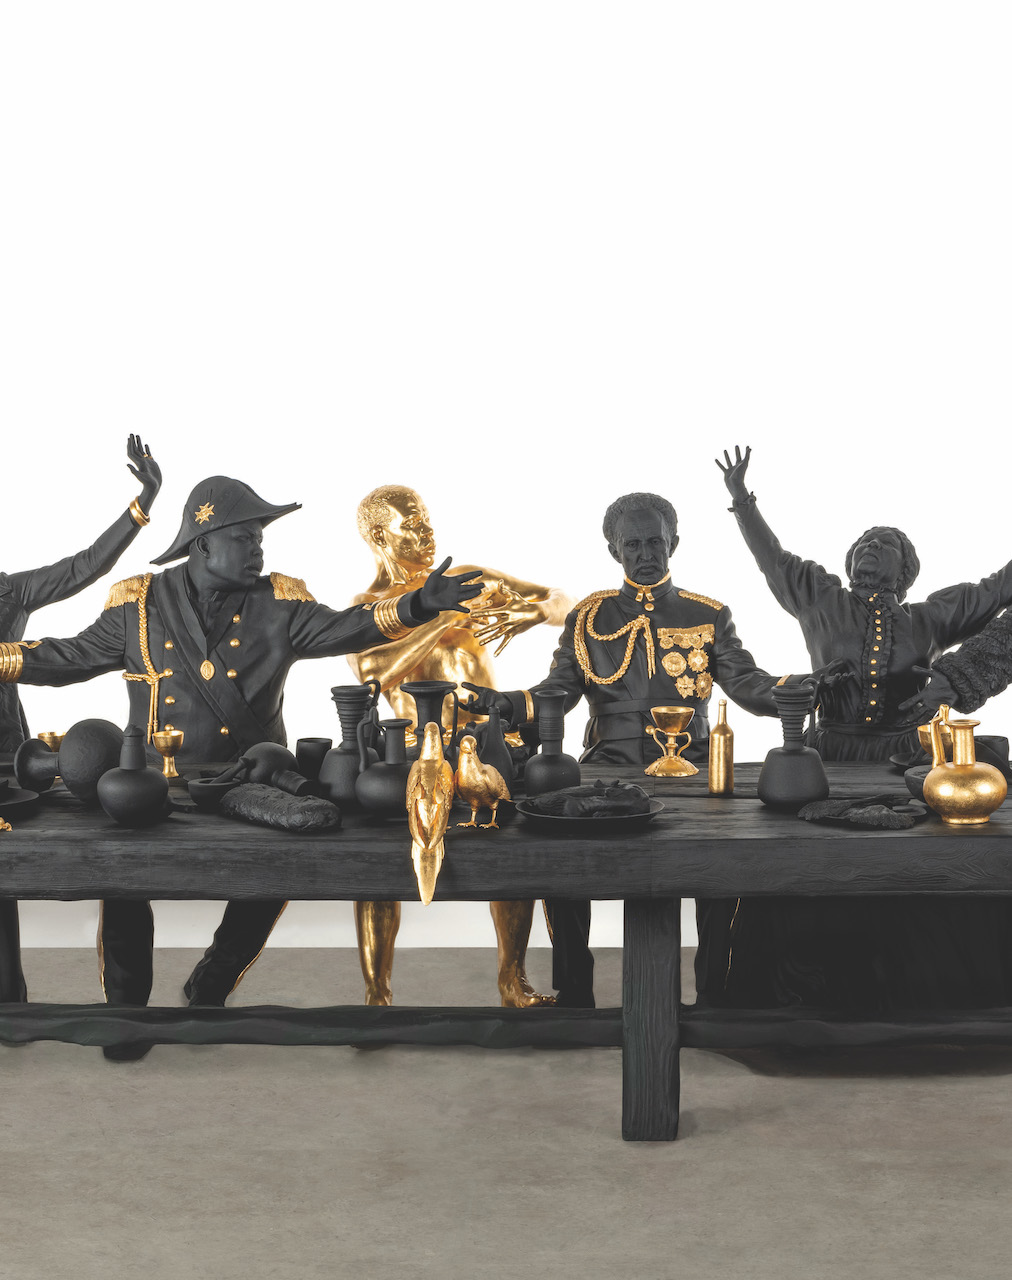 The Wick - Tavares Strachan, The First Supper (Galaxy Black) (detail), 2023
Bronze, black patina, gold leaf, 217.3 x 928.6 x 267.9 cm
Courtesy of the artist and Courtesy of Glenstone Museum, Potomac, Maryland. Photo: Jonty Wilde